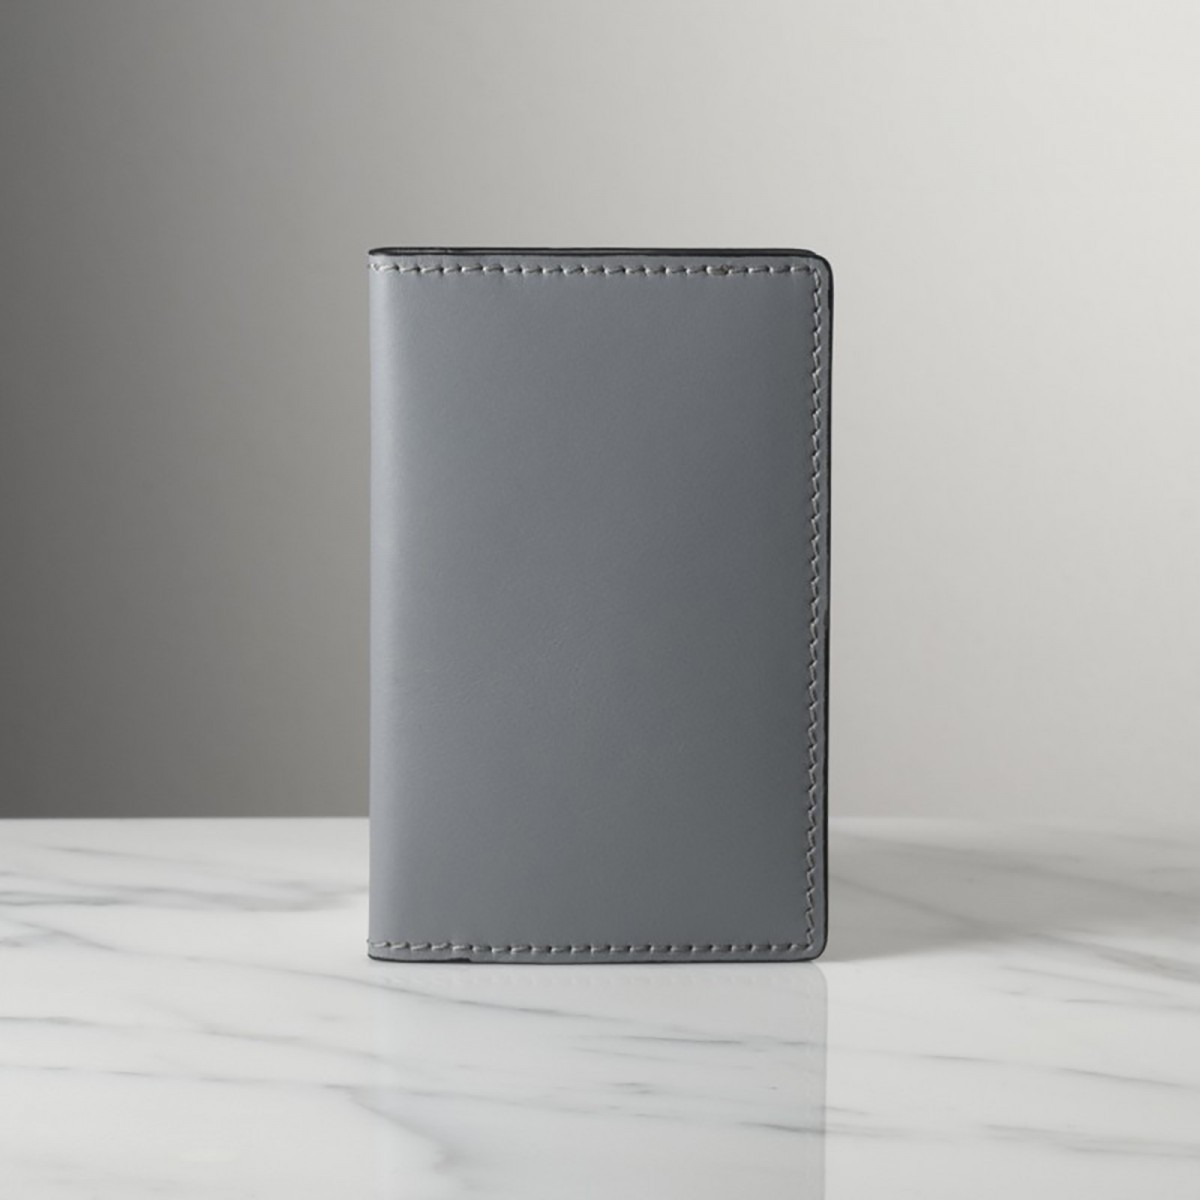 LORENZO - Handcrafted leather card holder made in Italy